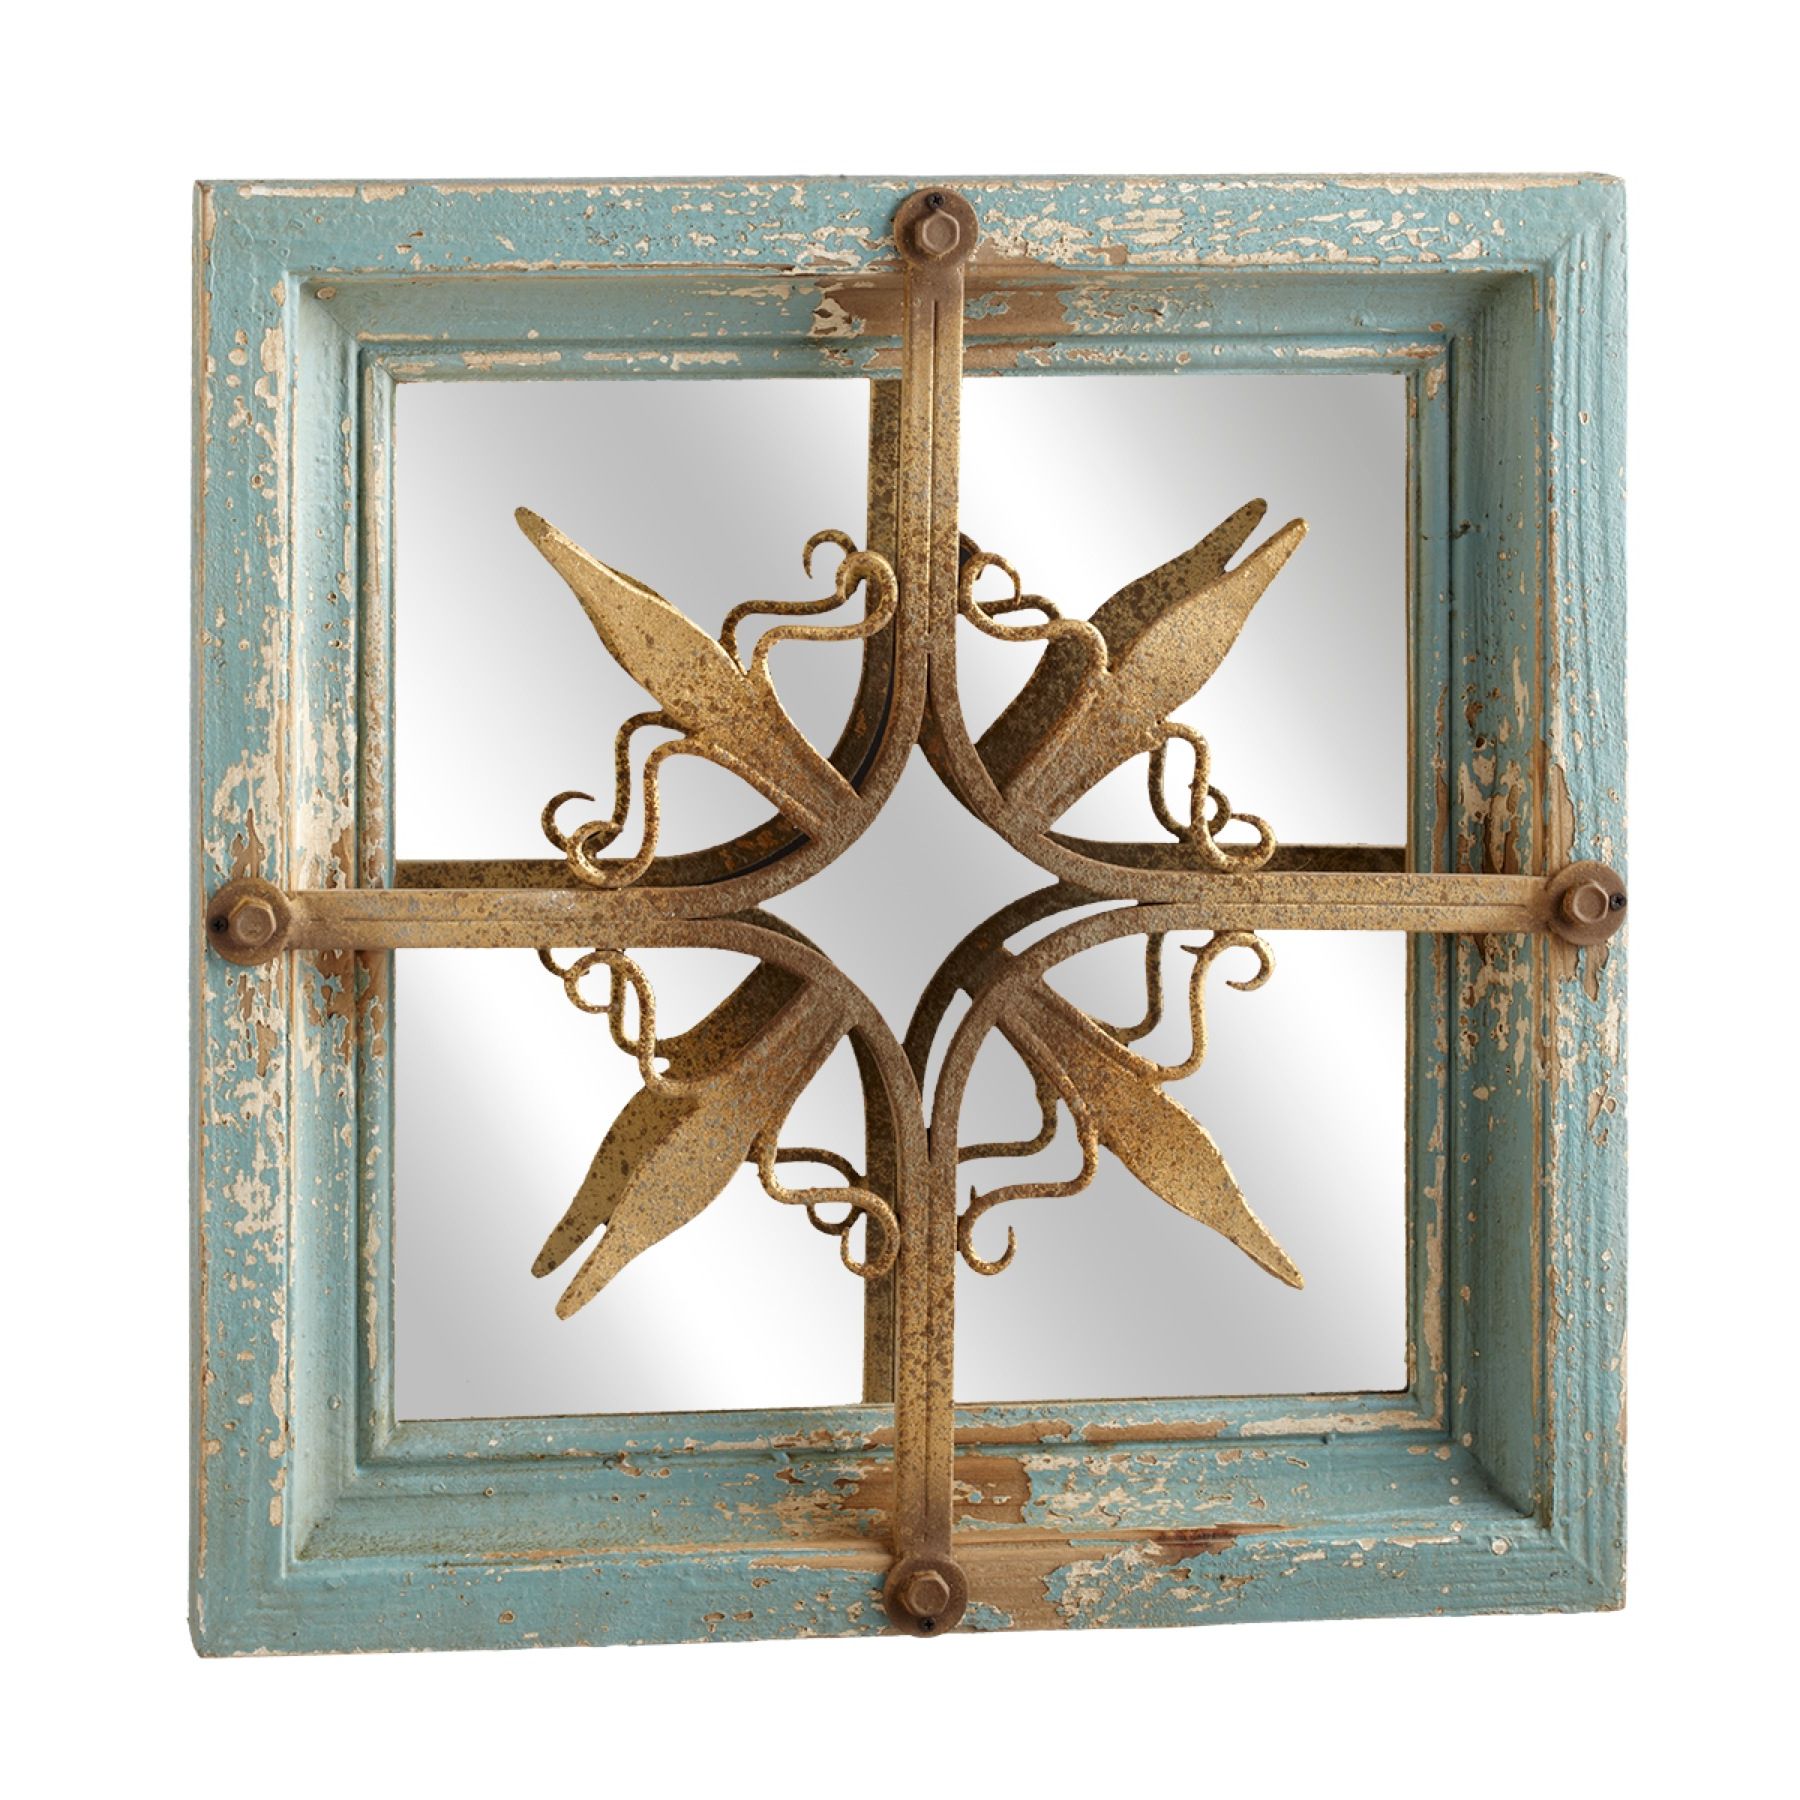 Most Popular Cbk Mdf Distressed Blue And Gold Star Square Wall Mirror 126613 With Regard To Glossy Blue Wall Mirrors (View 4 of 15)